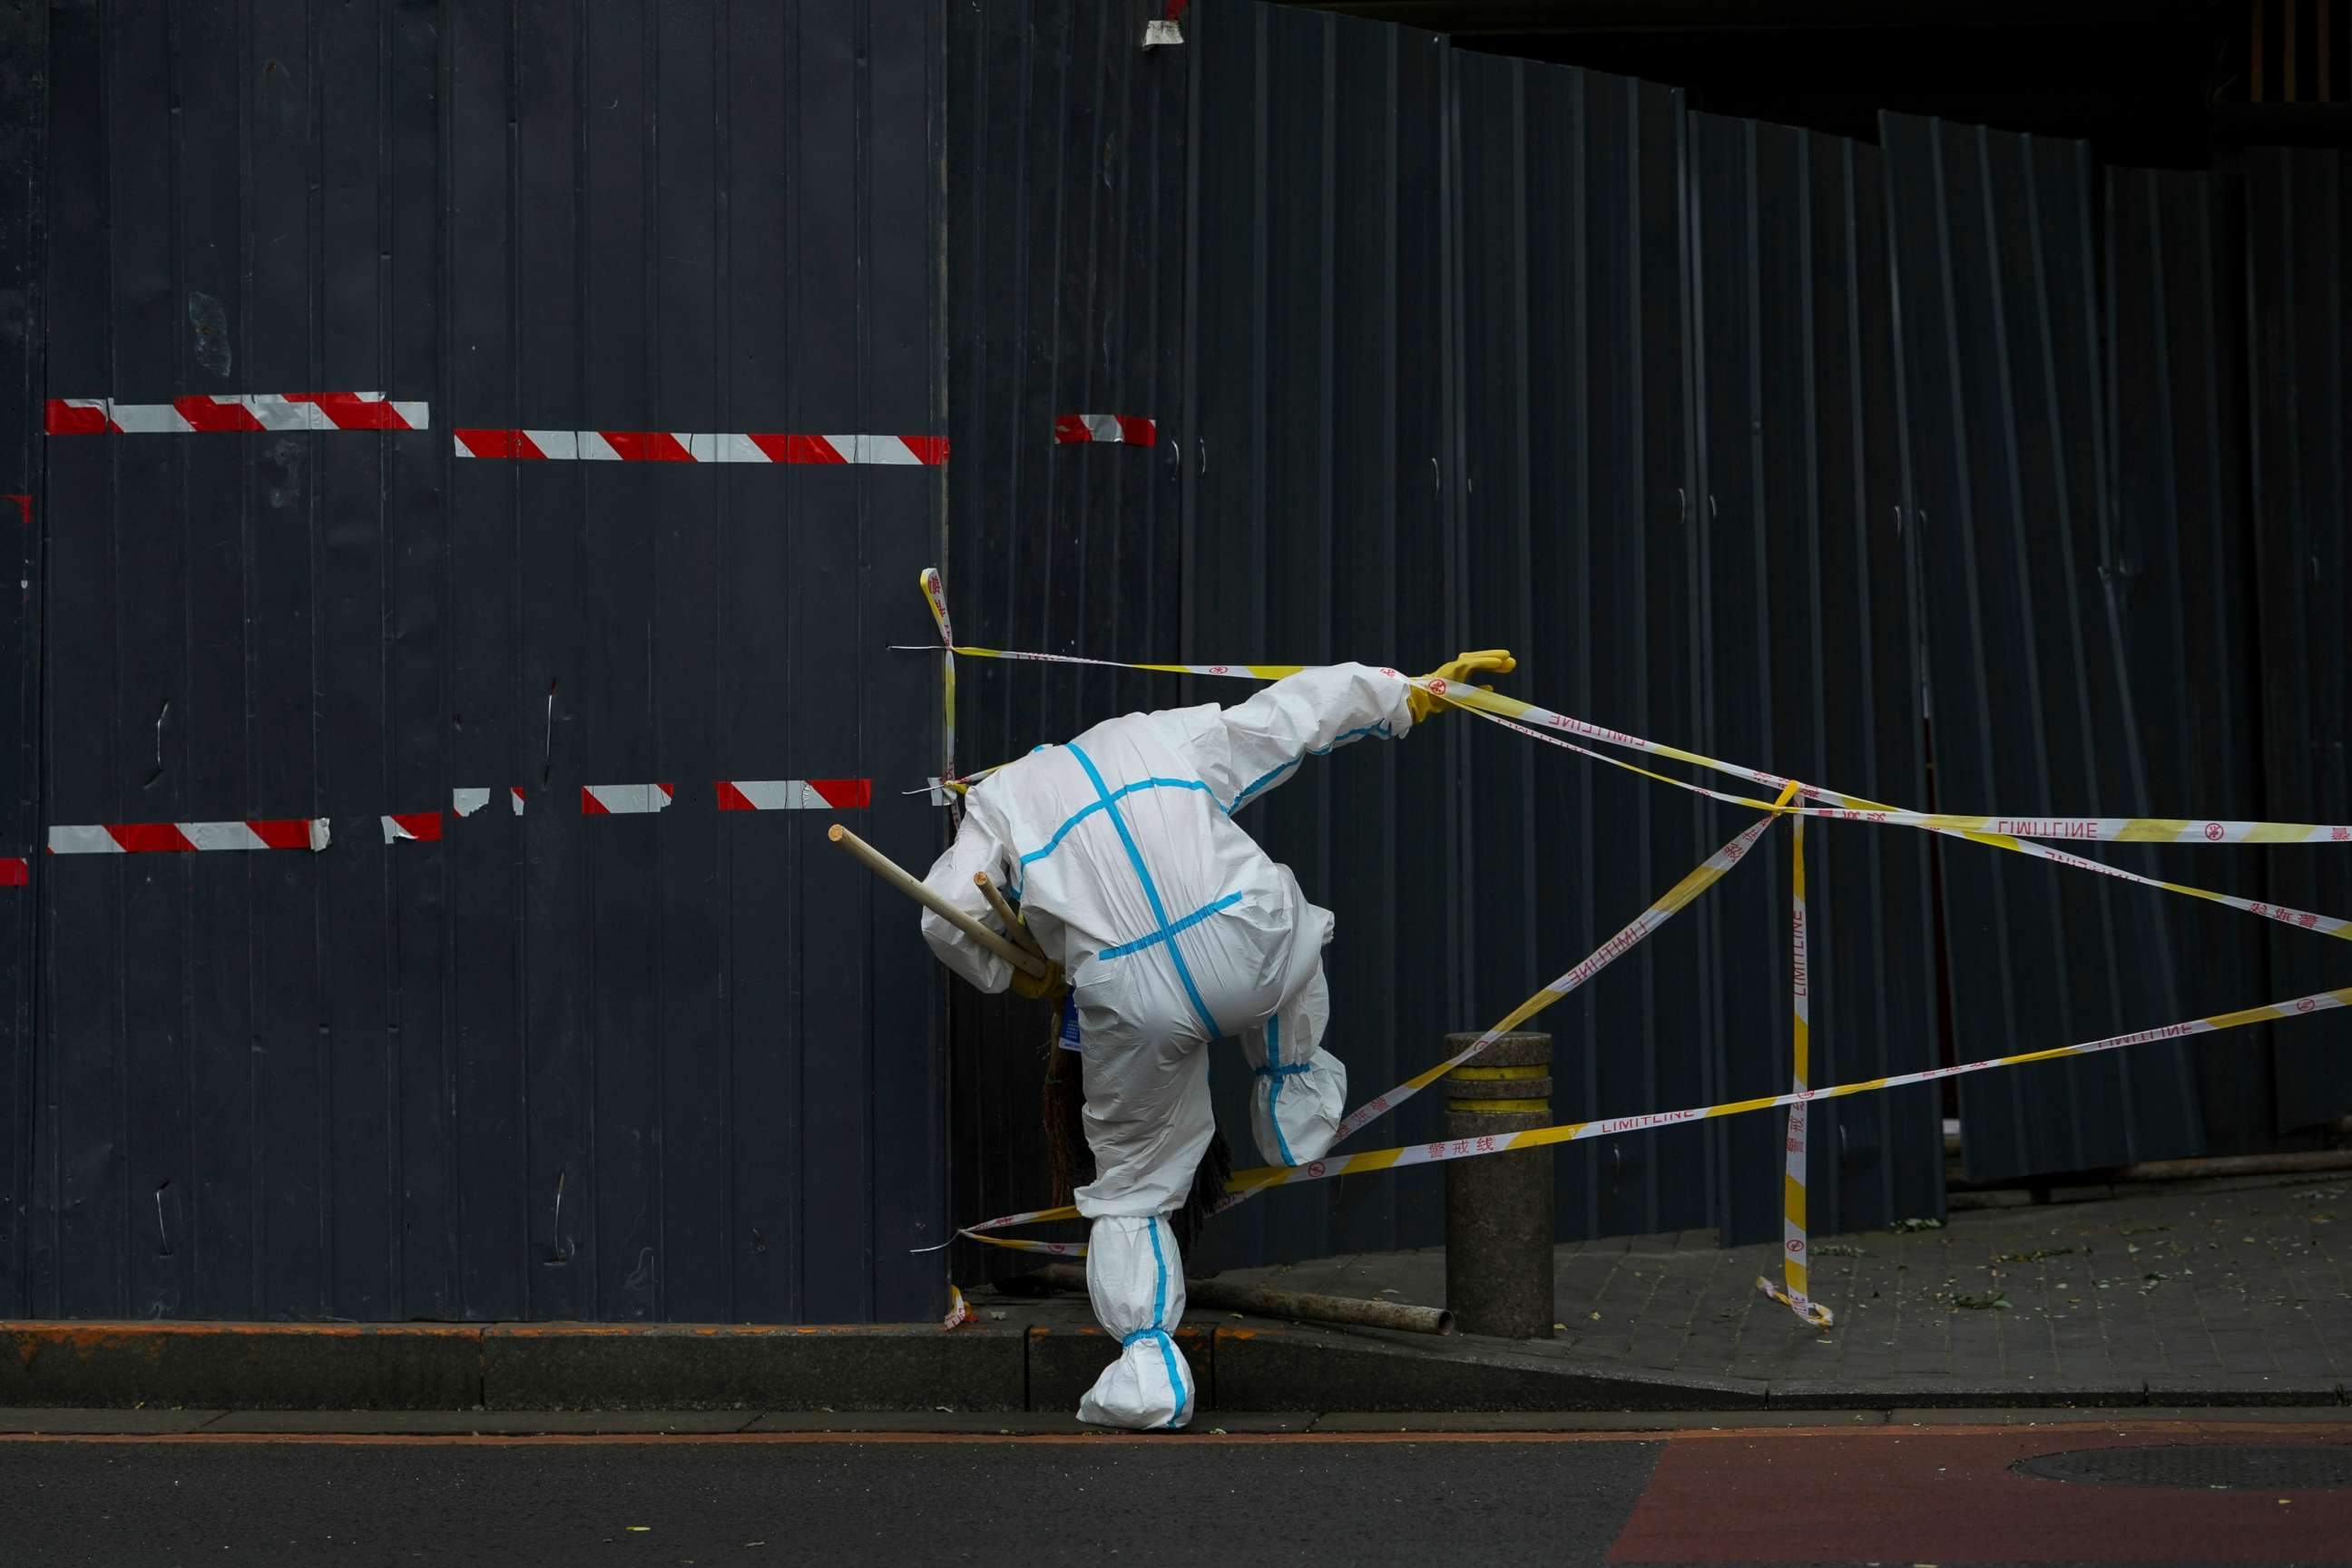 PHOTO: A worker in protective suit walks through the caution tapes along metal barricades retail shops that has been locked down as part of COVID-19 controls in Beijing, China, on June 26, 2022.